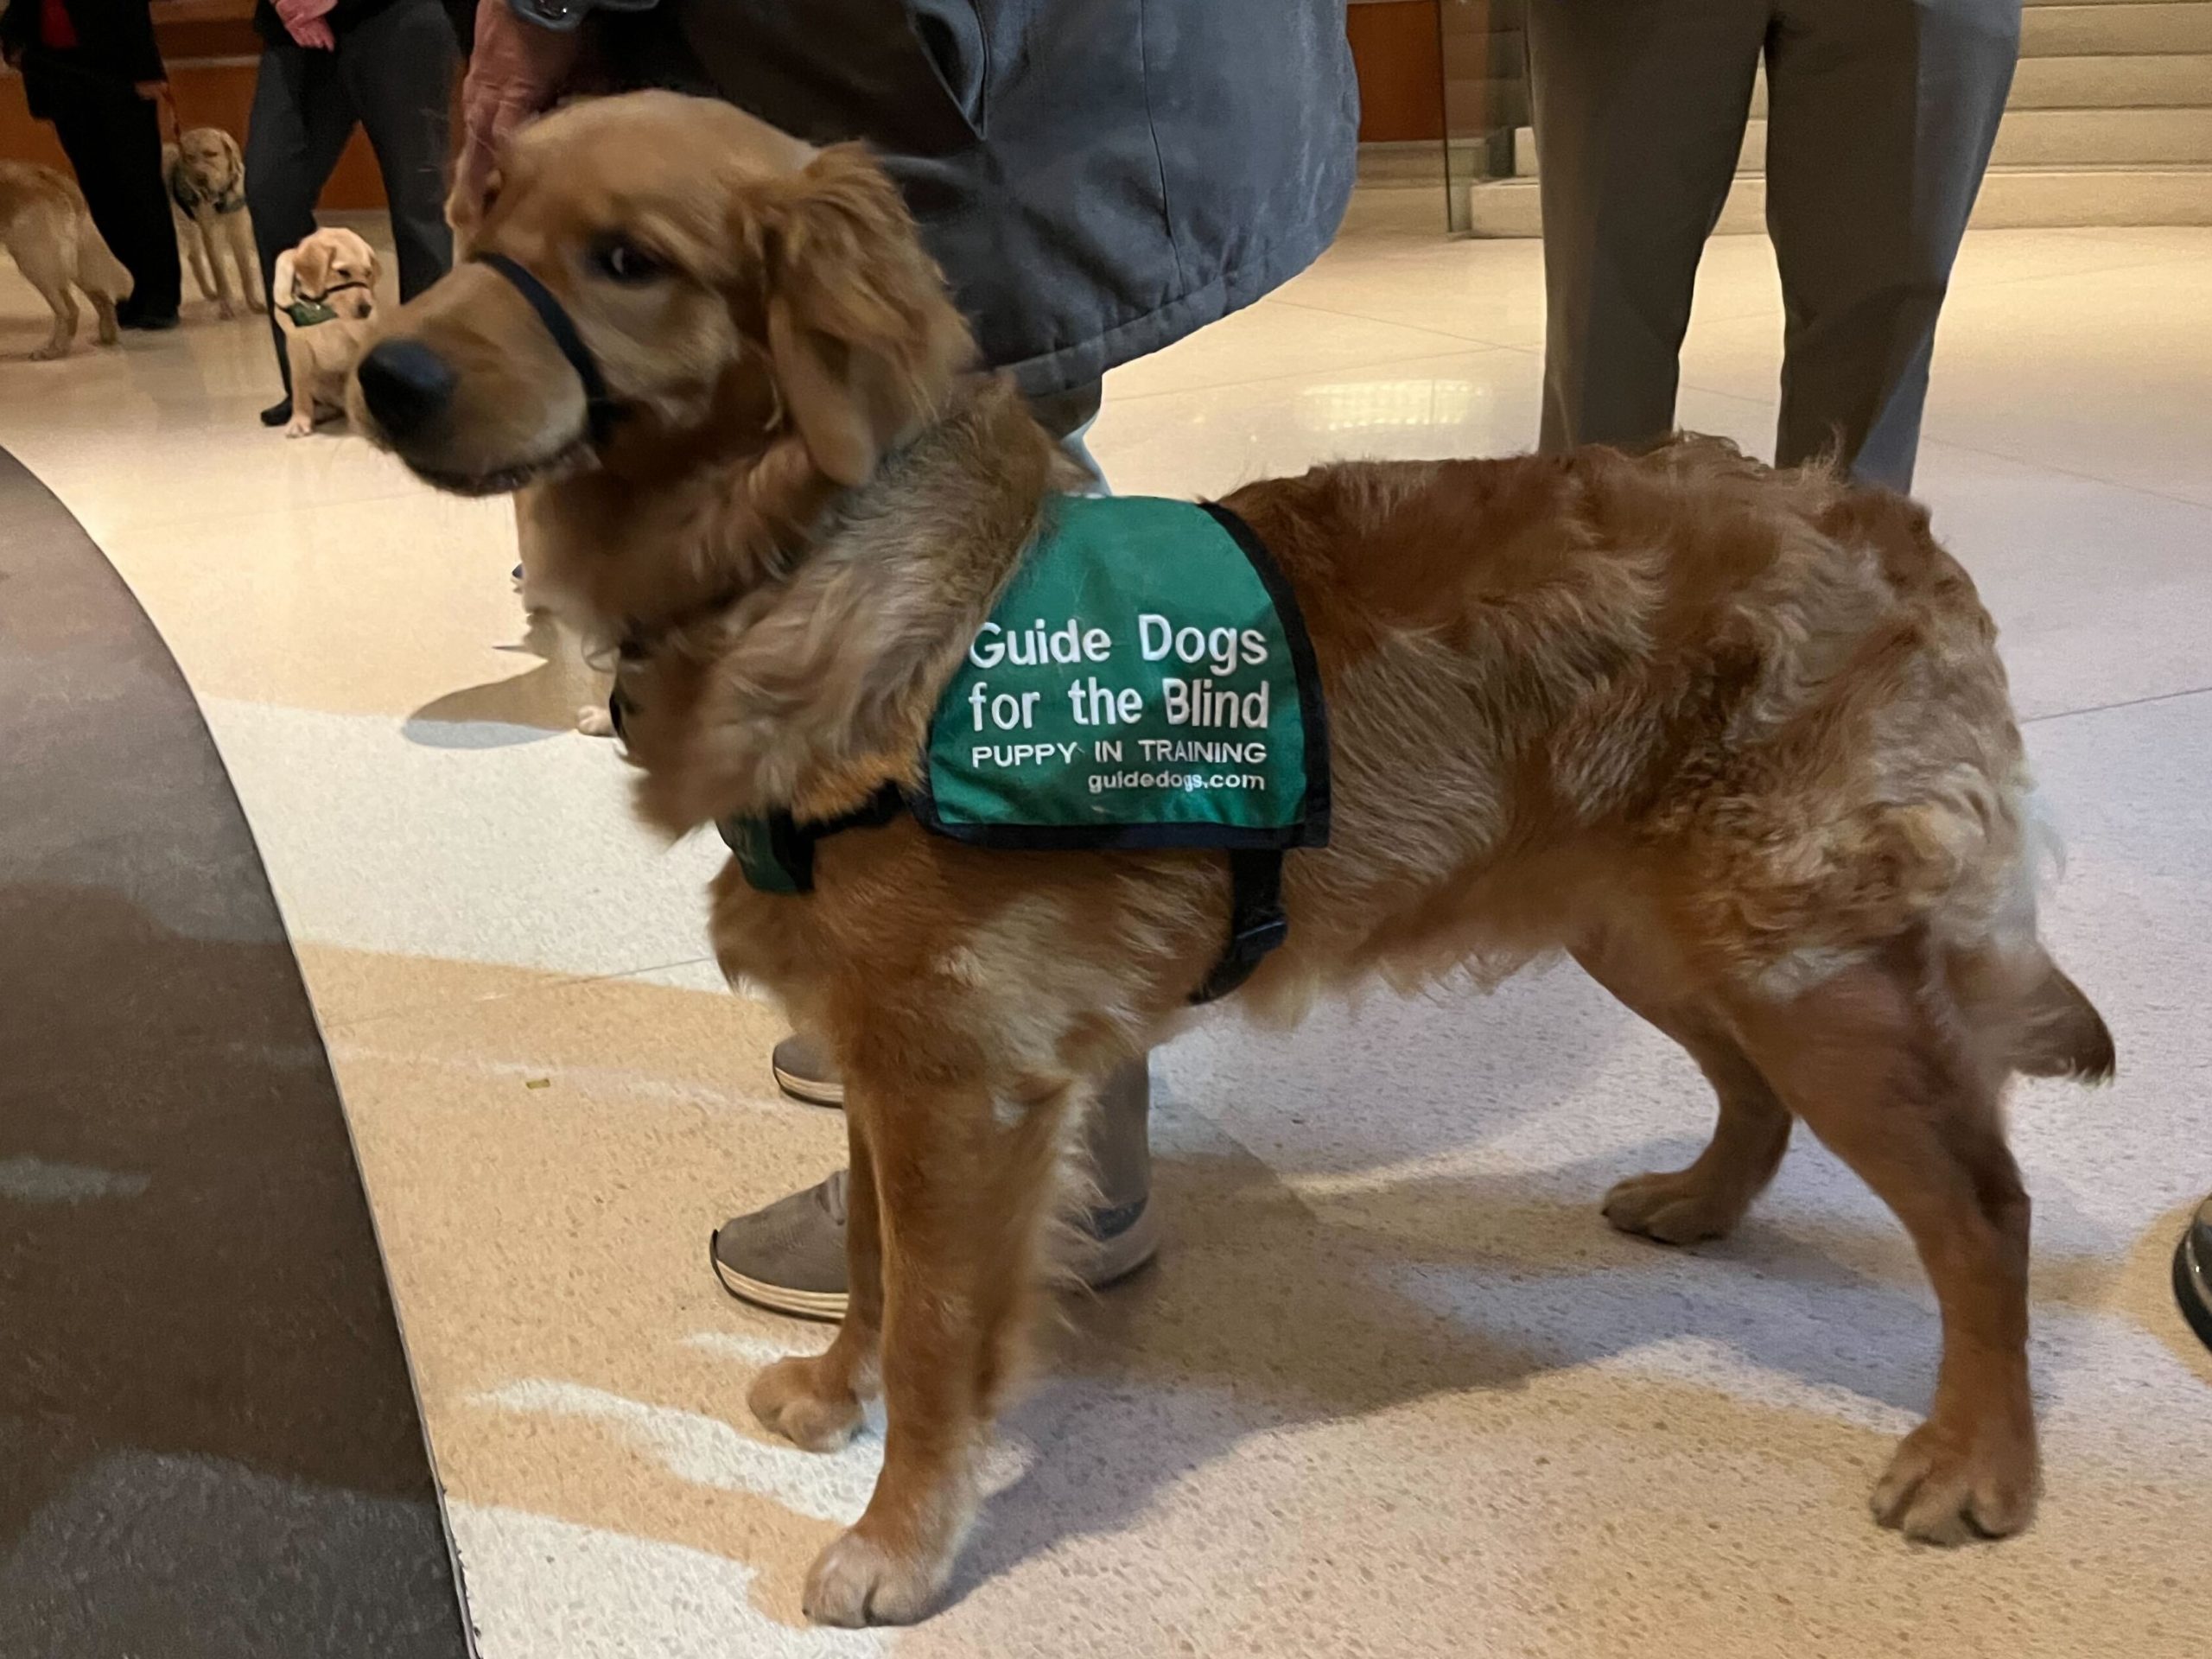 Brown-furred guide dog in training, wearing a green bandana saying, “Guide Dogs for the Blind,” stands on the lobby floor.